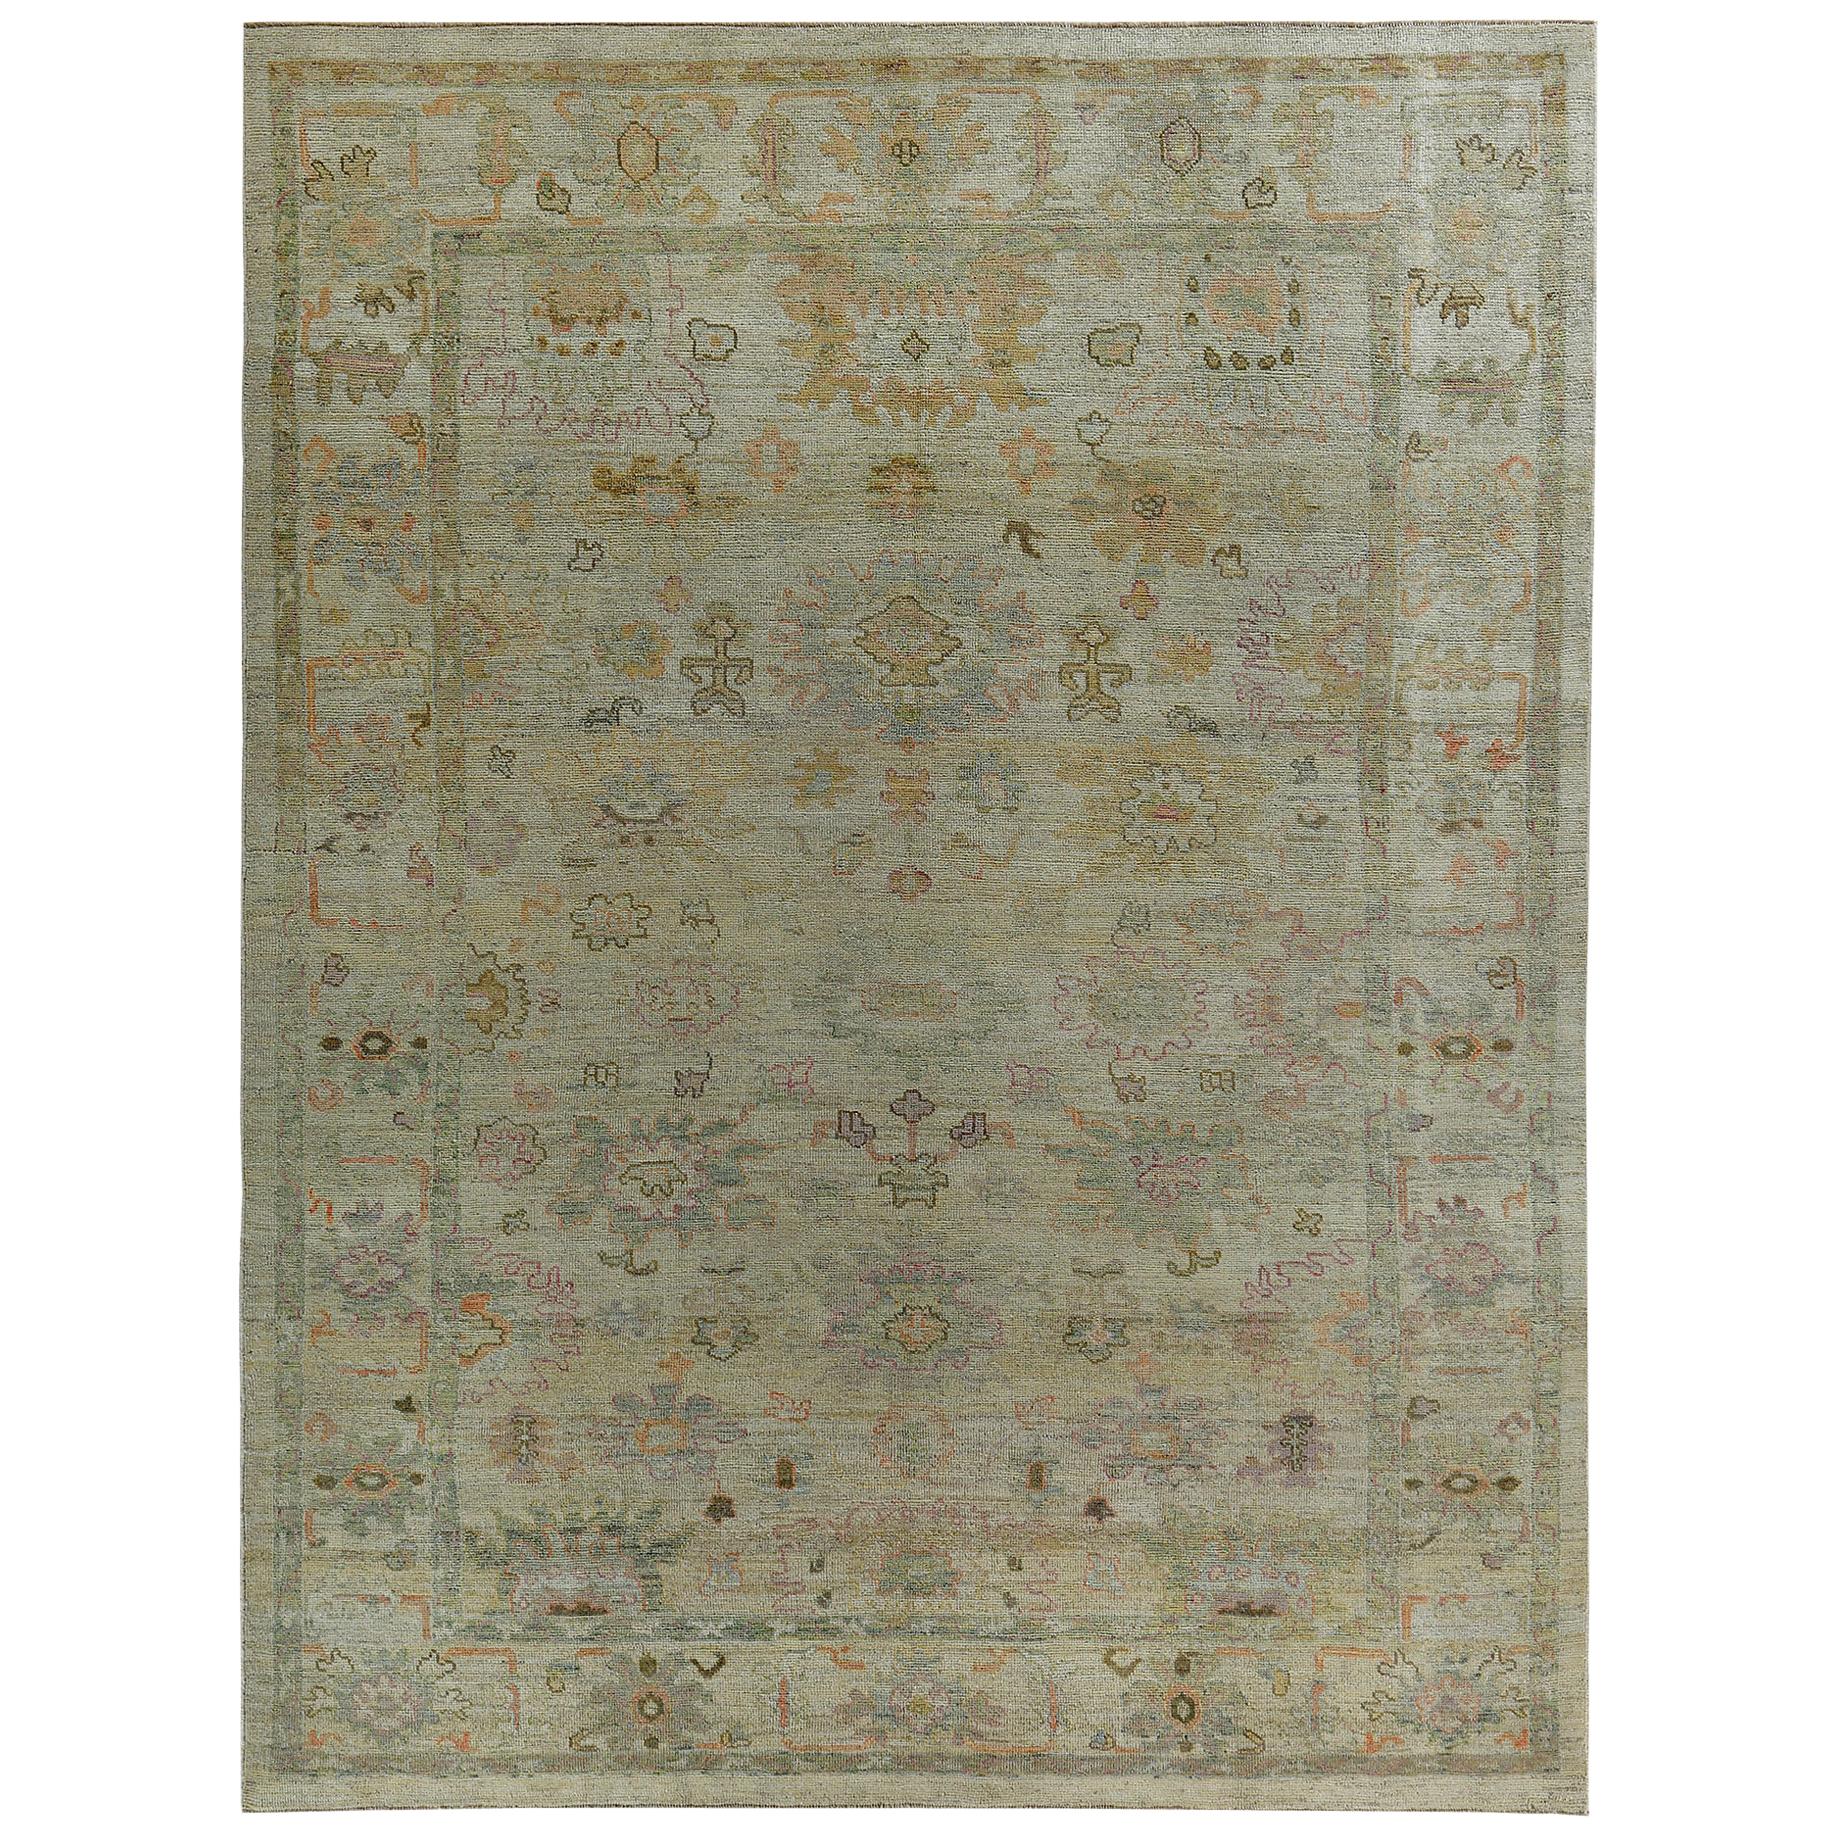 Nazmiyal Collection Soft Green Modern Turkish Oushak Rug 10 ft 3 in x 13 ft 6 in